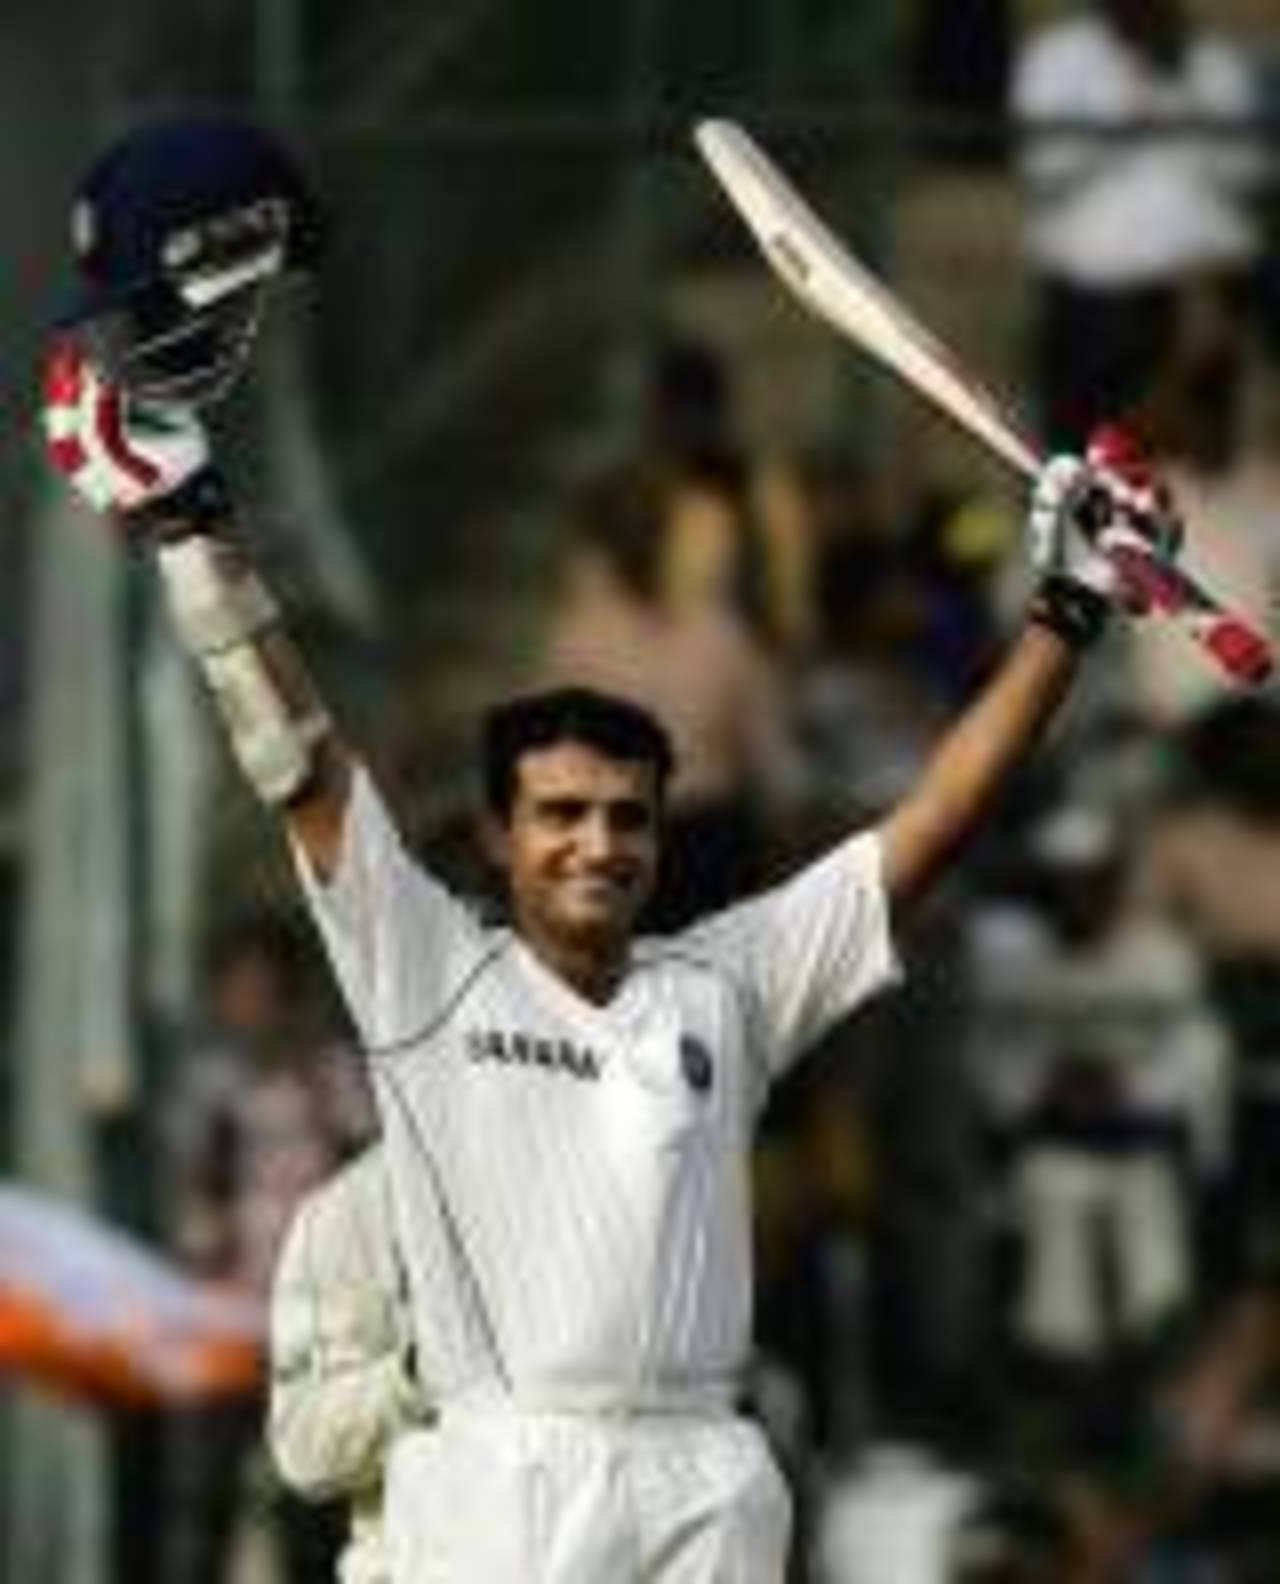 Arms raised as Sourav Ganguly brings up his 15th Test hundred, India v Pakistan, 3rd Test, Bangalore, 1st day, December 8, 2007